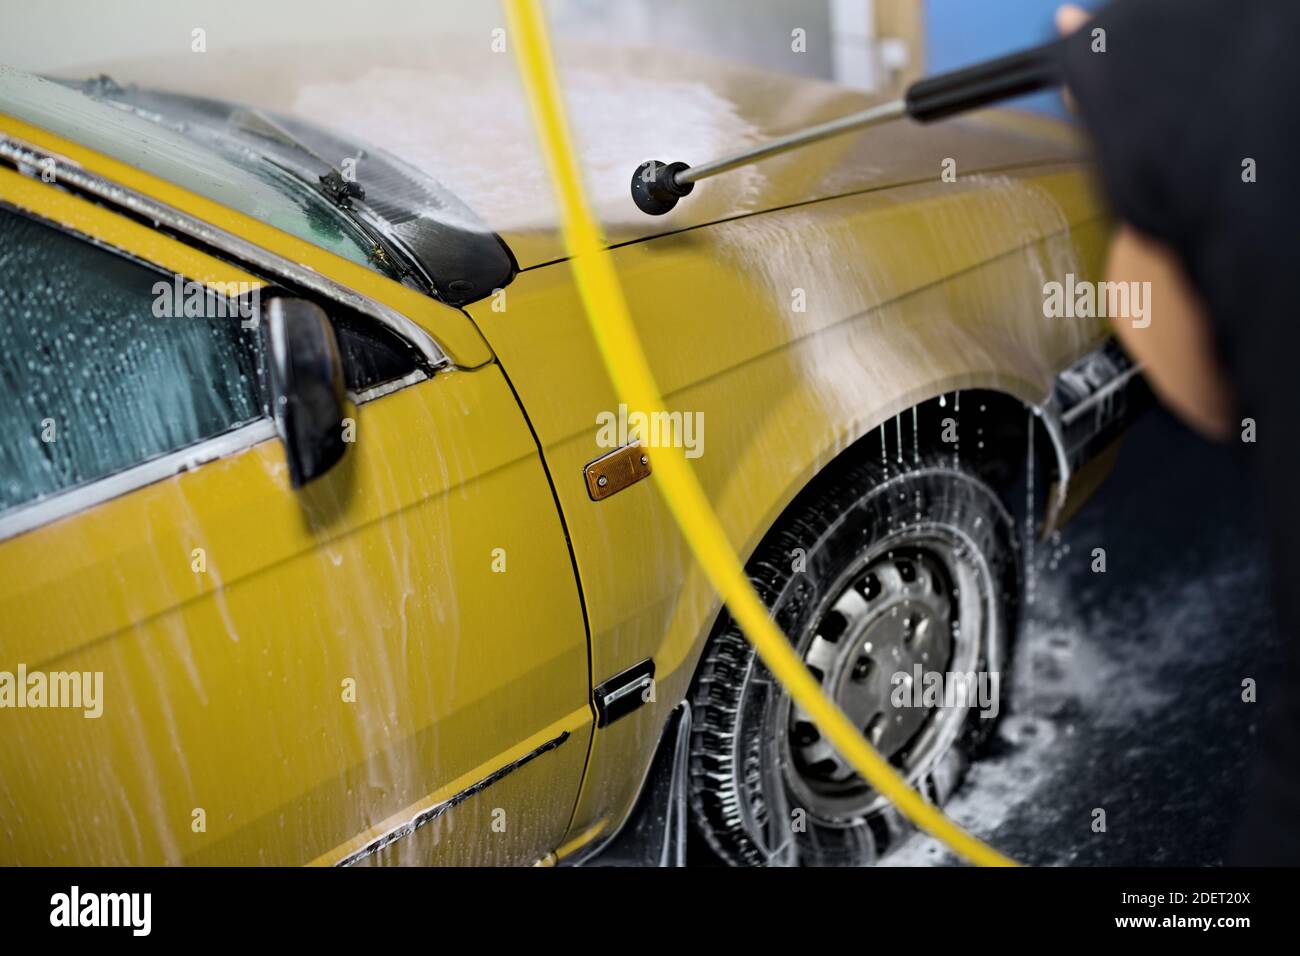 Cleaning hosing washing the car with high pressure water jet cleaner washer blaster in carwash system Stock Photo